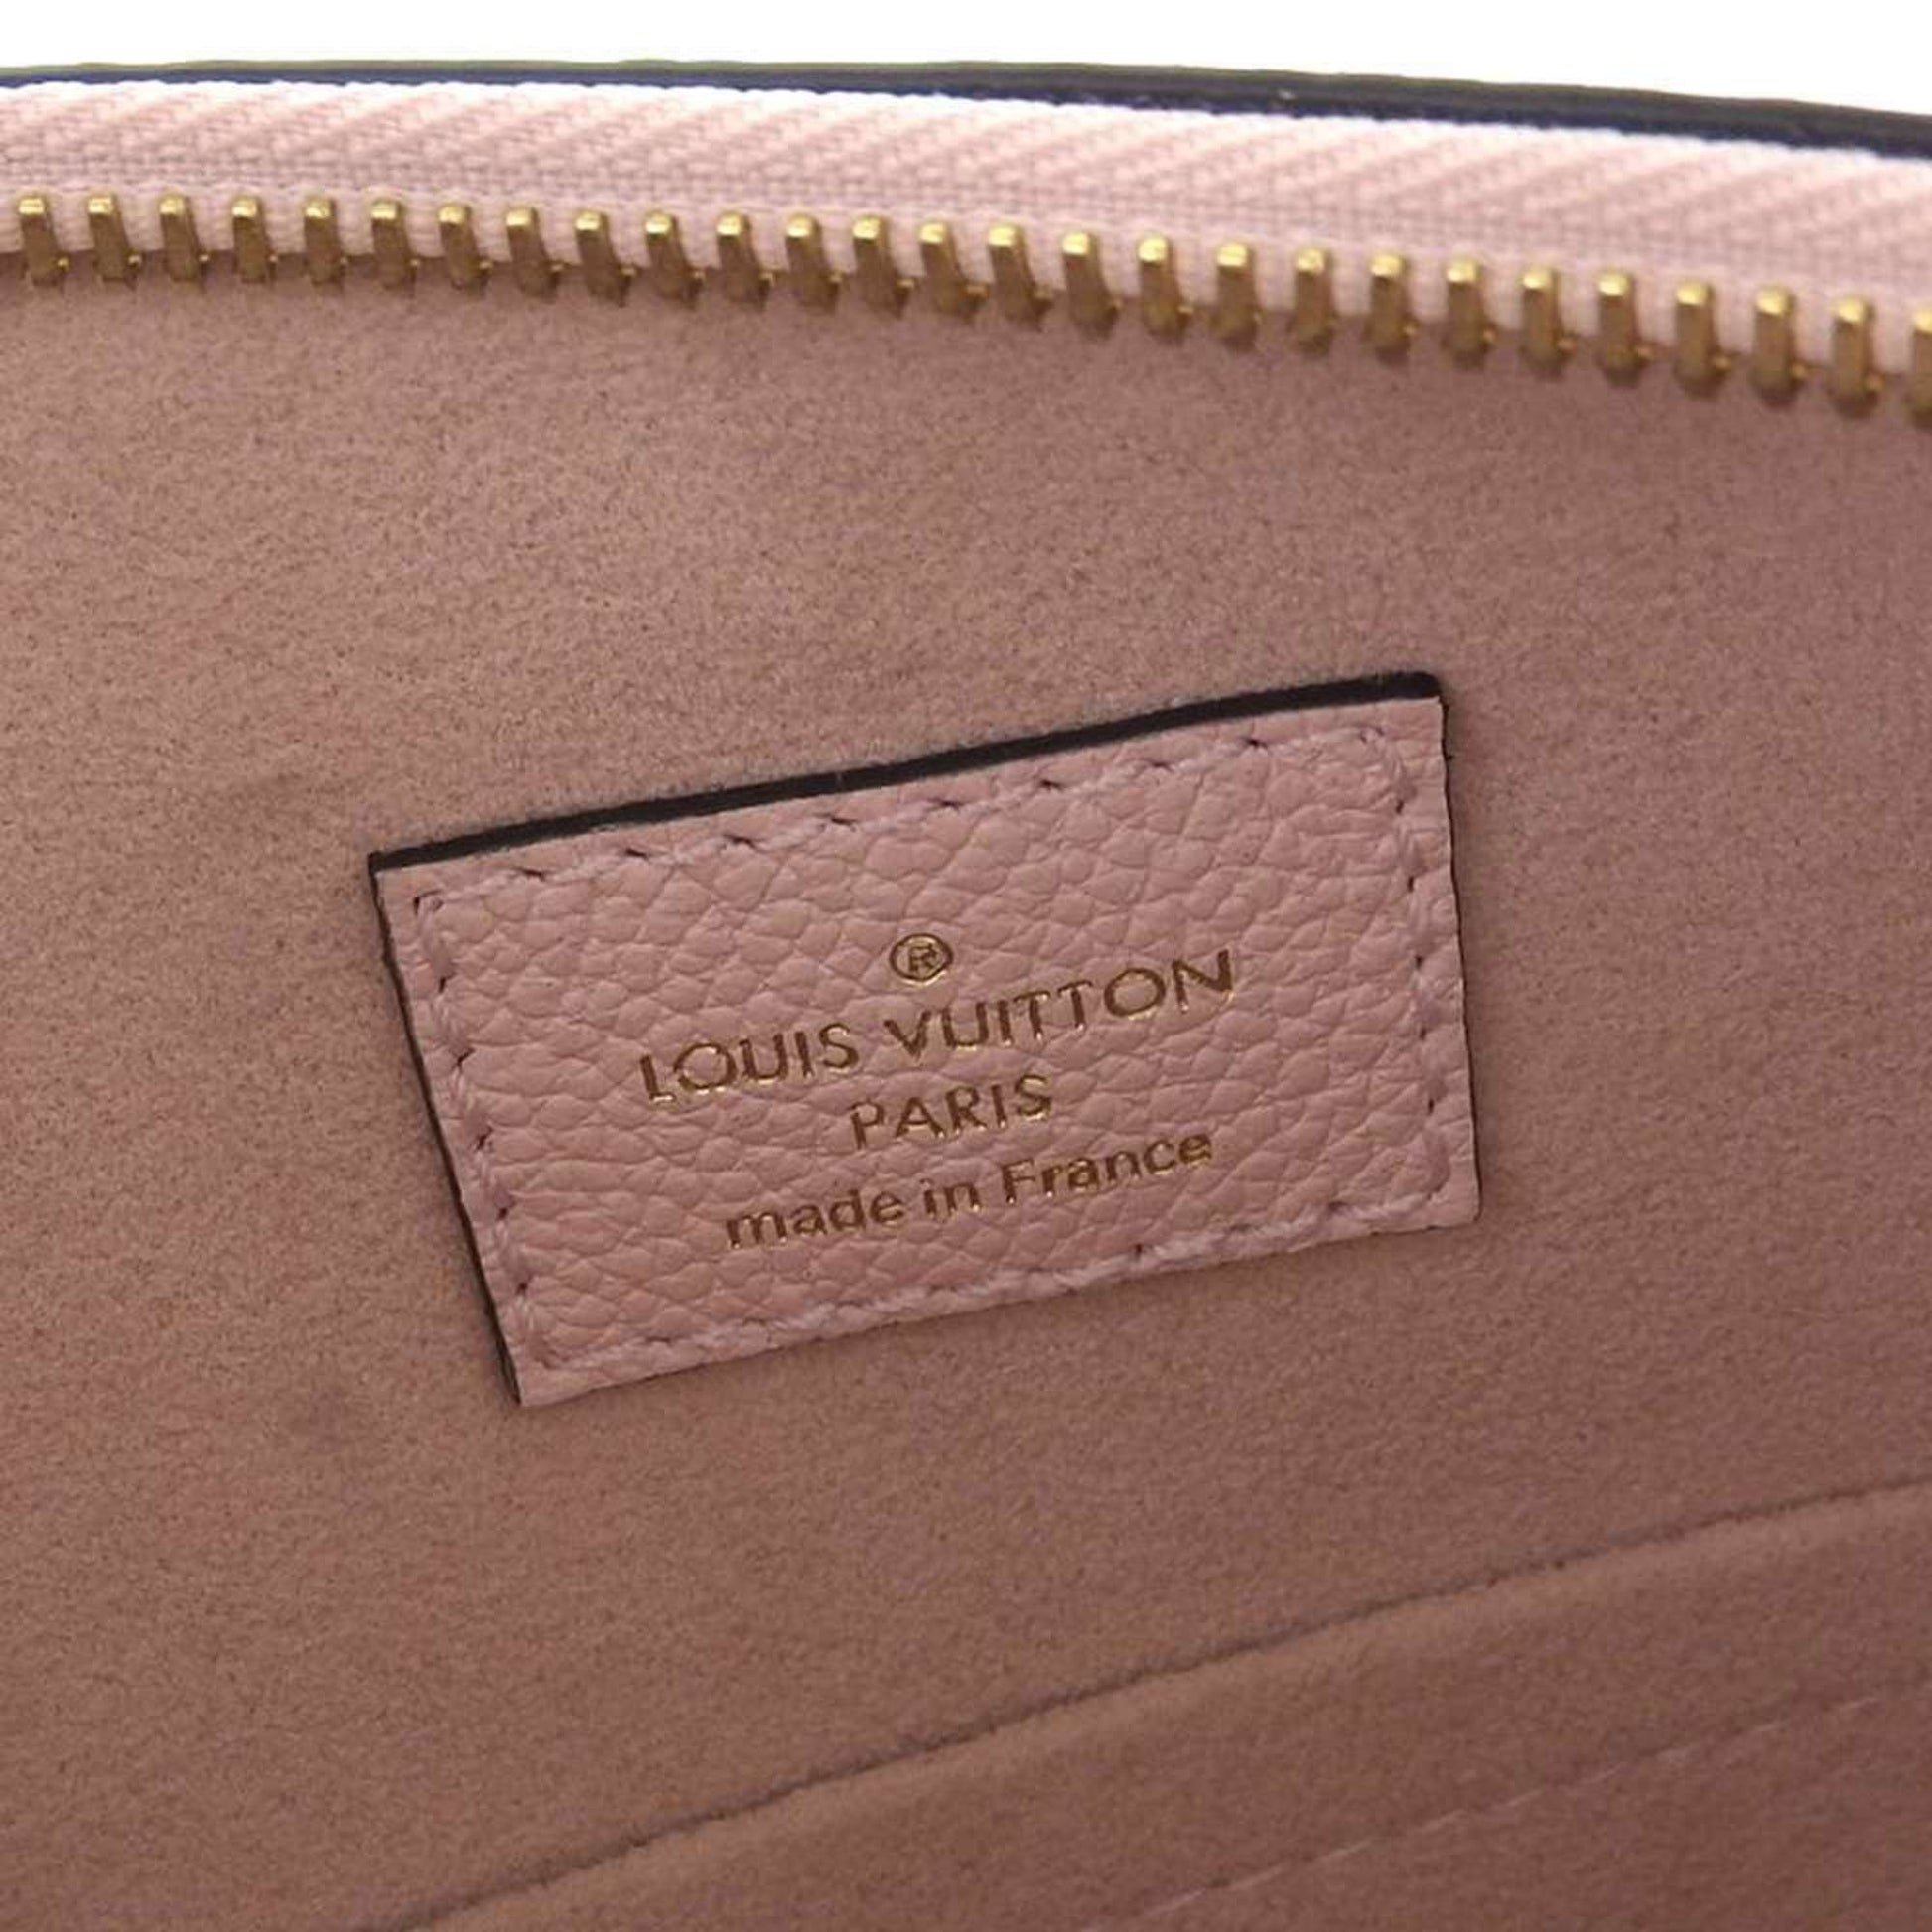 Authenticated Used Louis Vuitton LOUIS VUITTON Monogram Giant Marshmallow  PM Shoulder Bag Pink M45697 (with RFID)